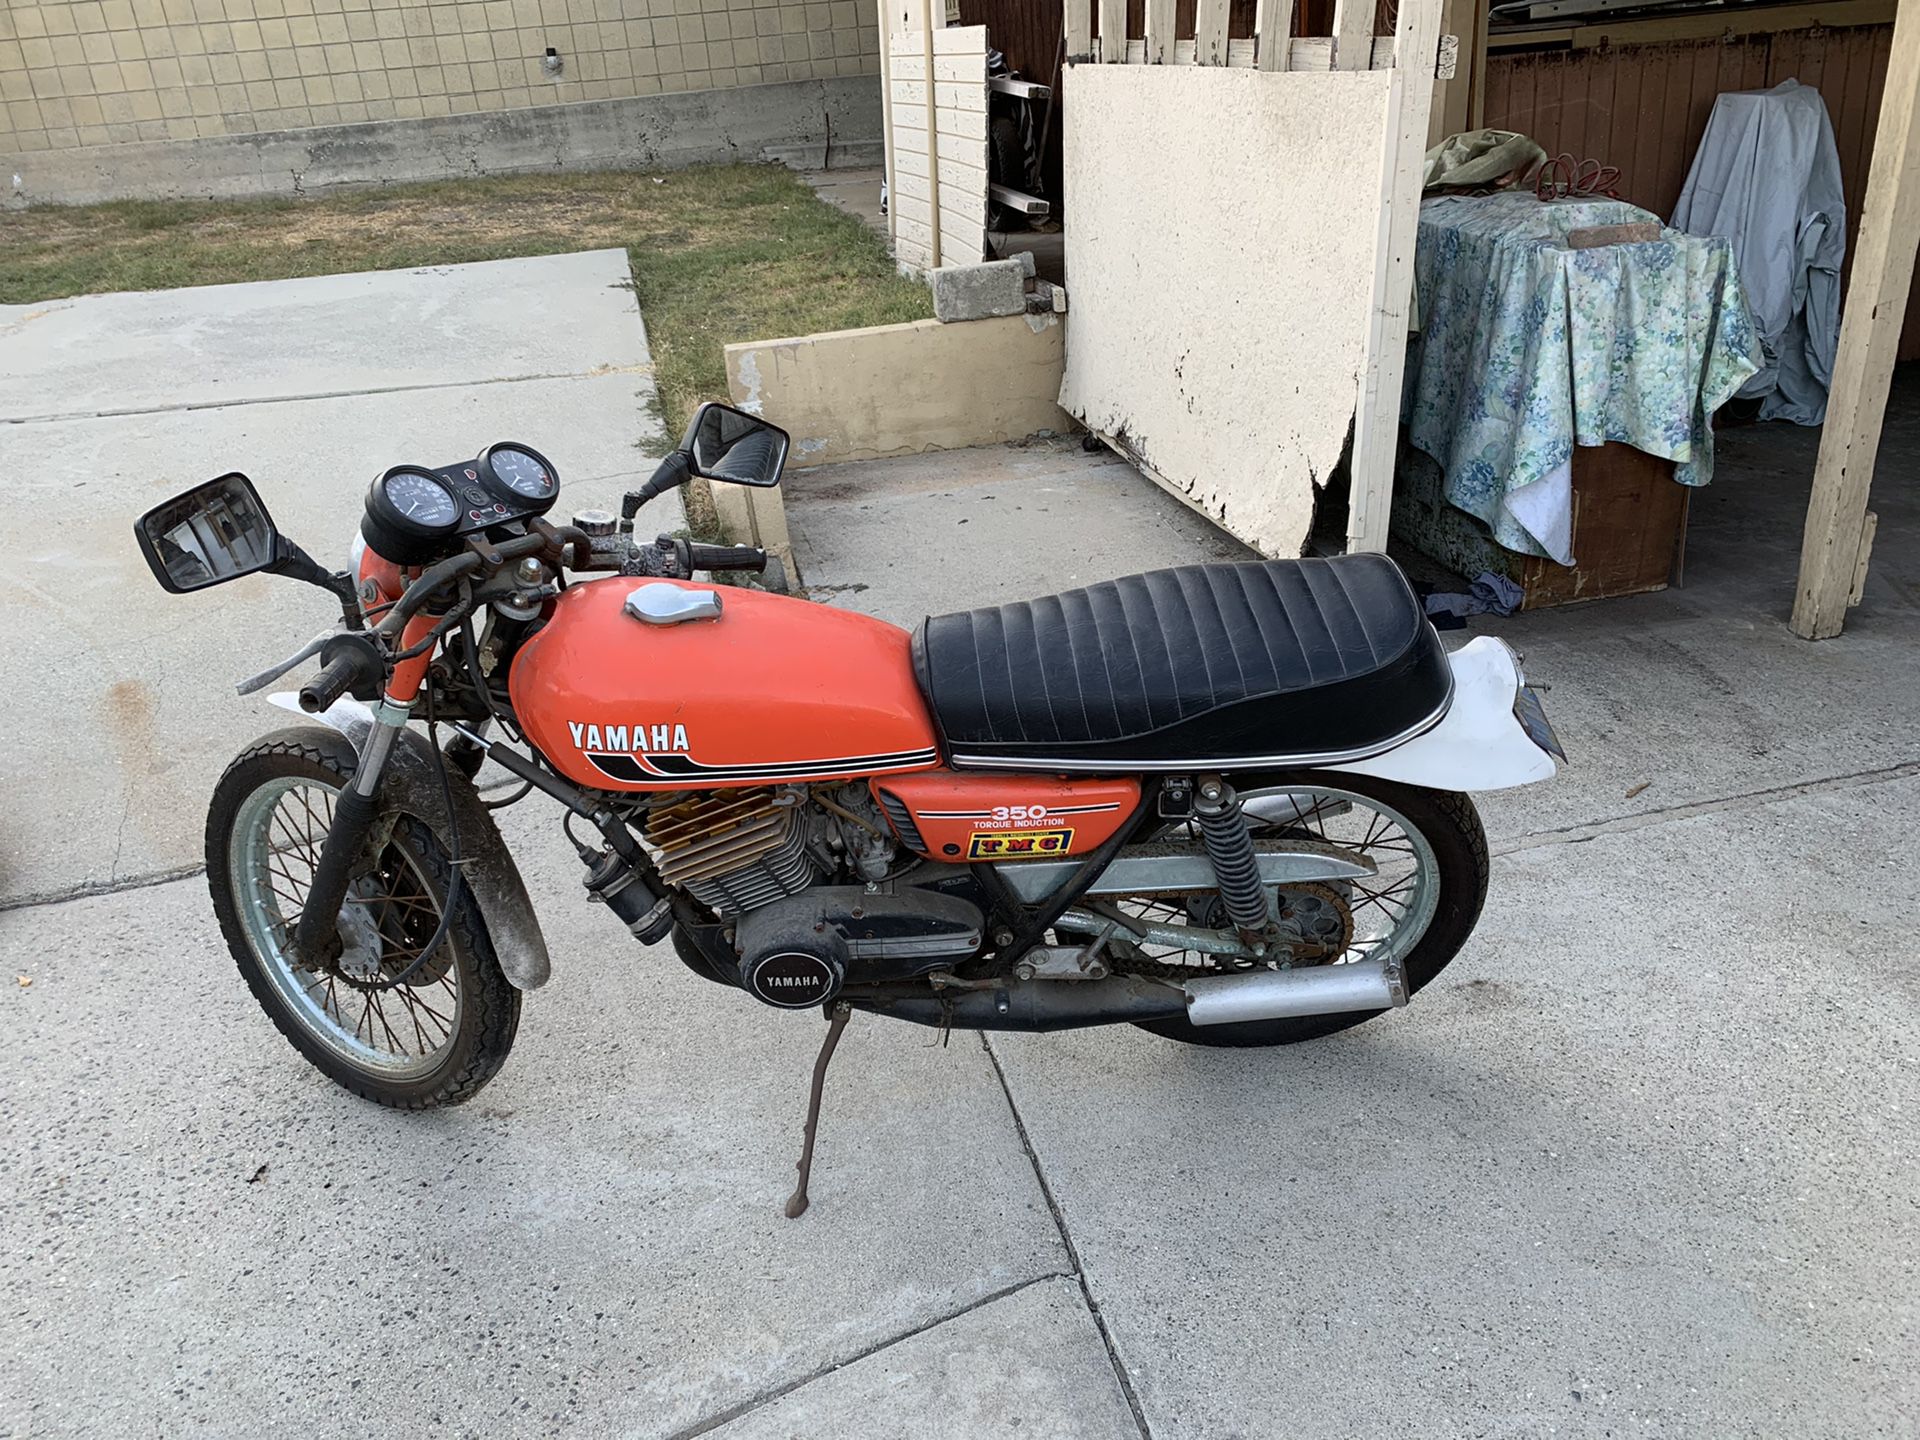 1973 RD 350 2 stroke with oil injection. Hasn’t been started in 10 years garage kept. Bike is complete with extra parts